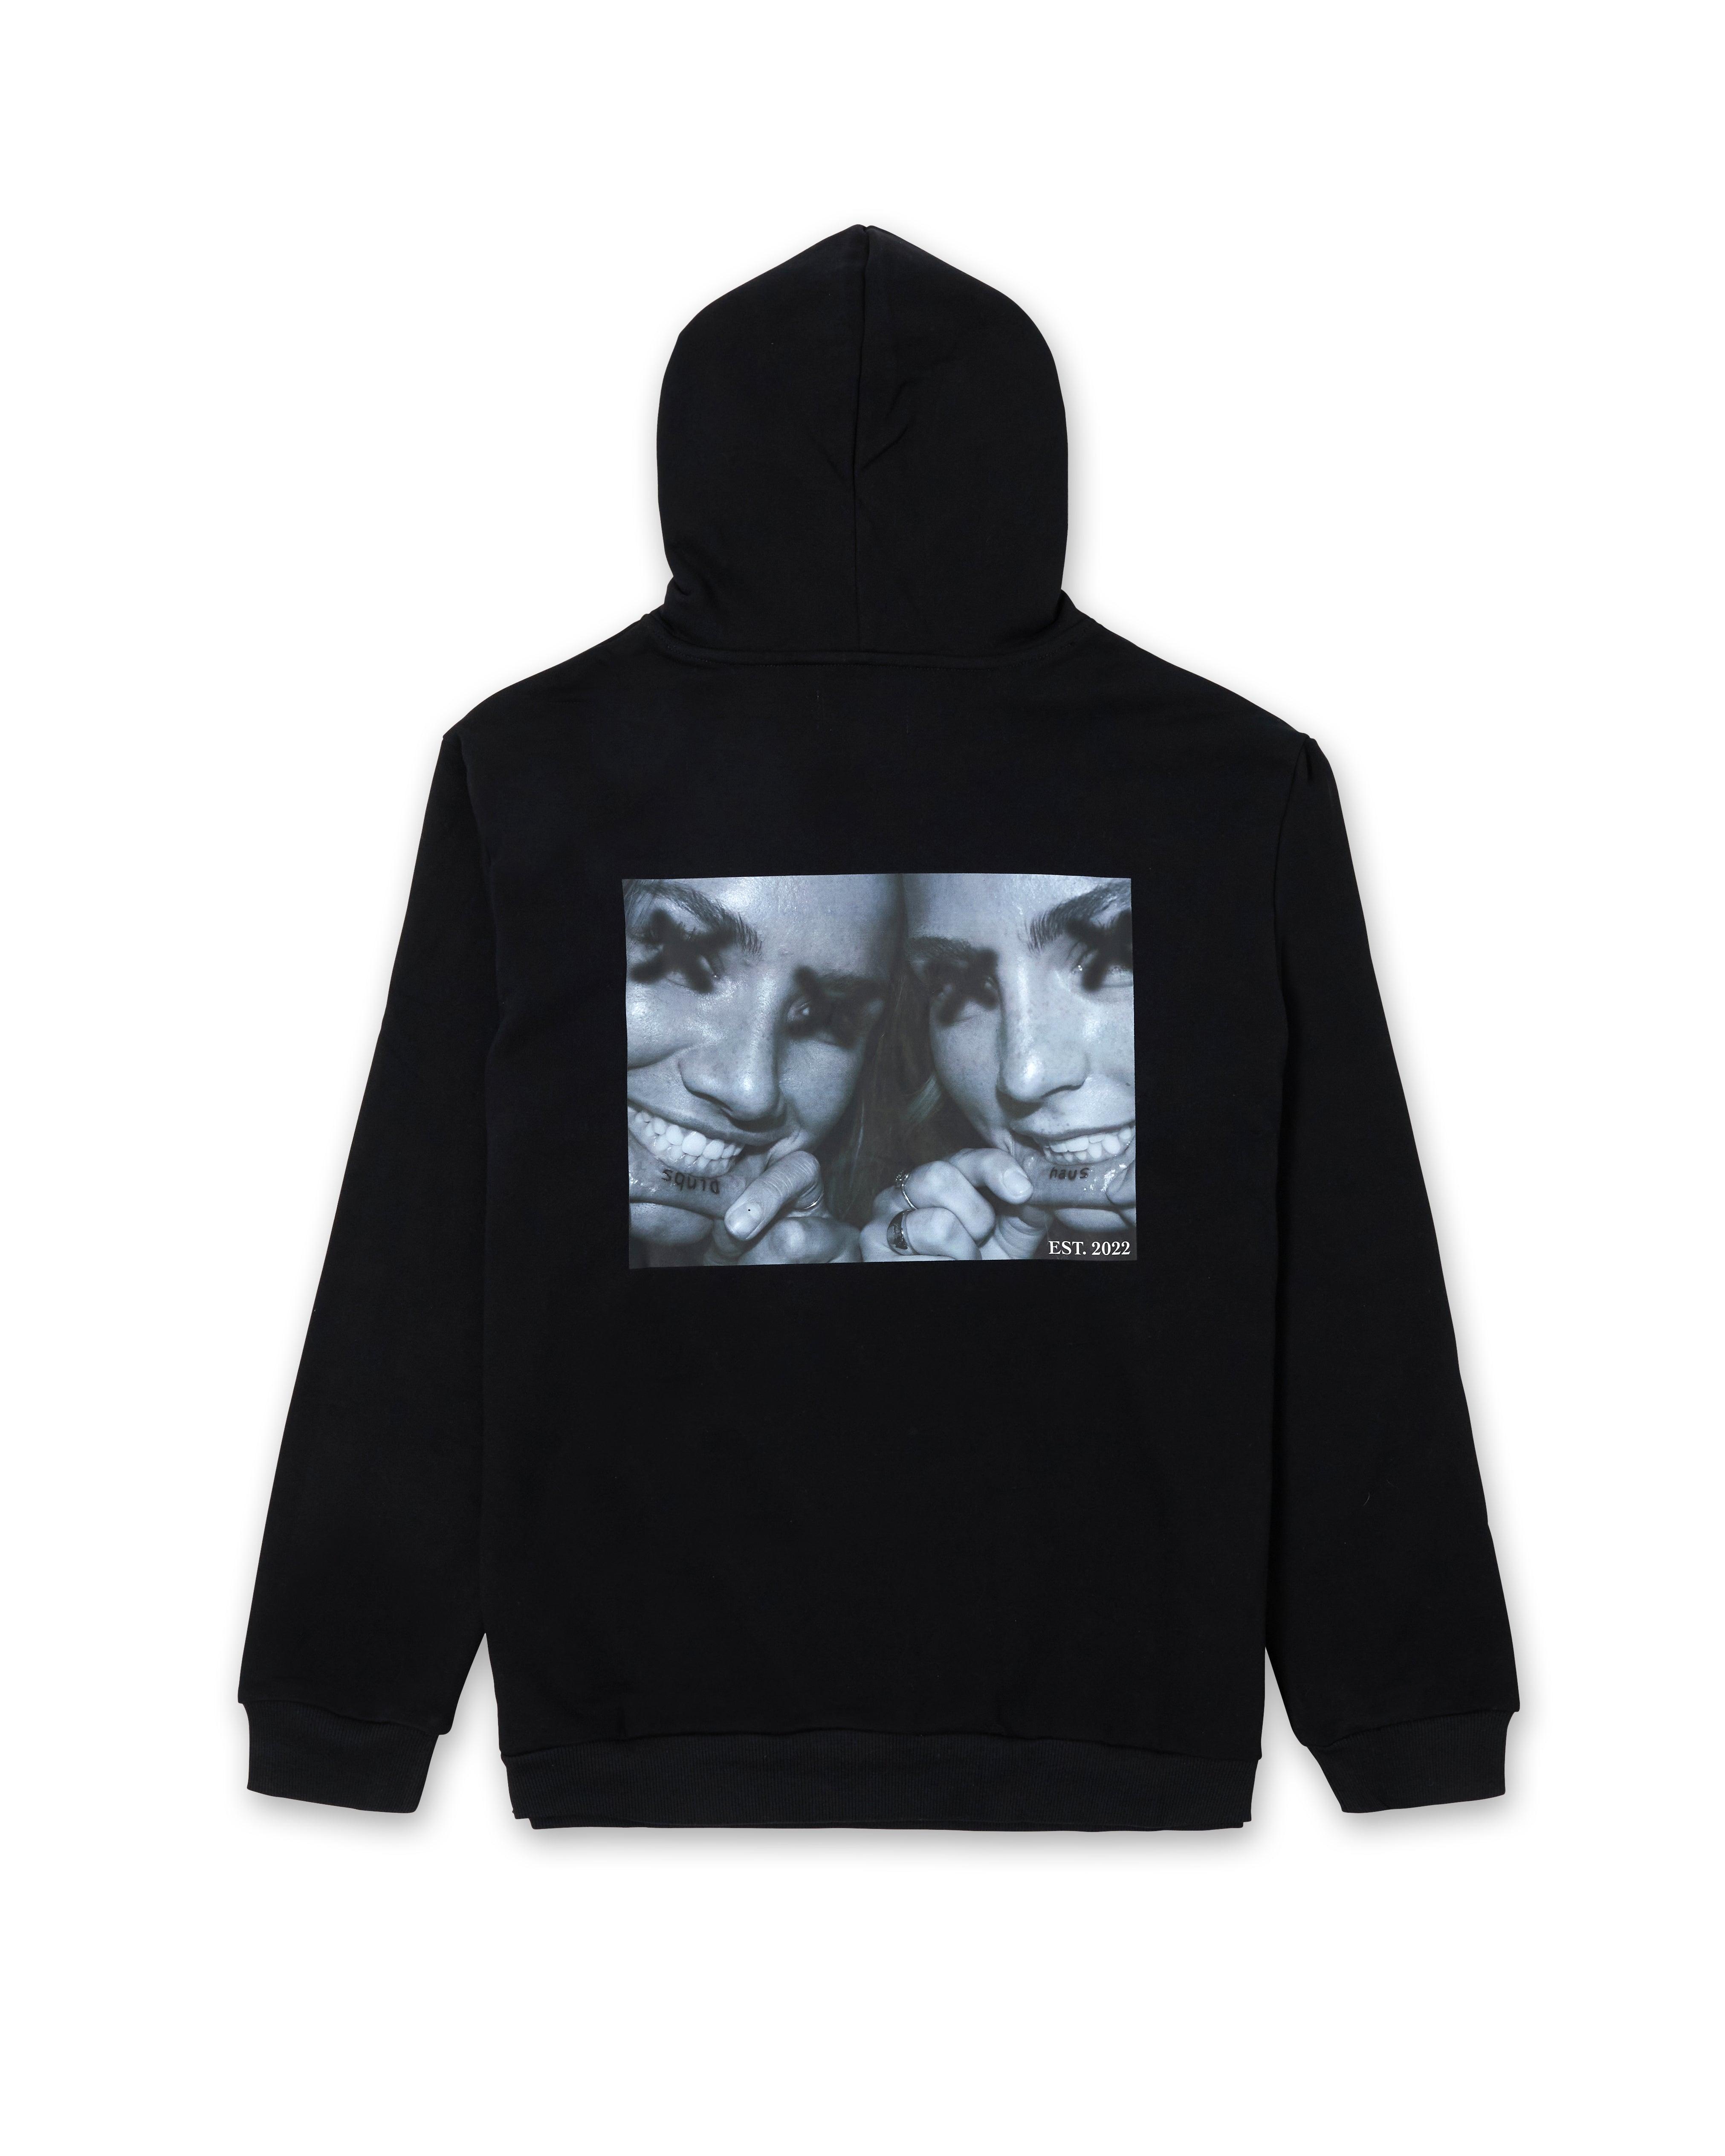 A view of the back of the Lip Tat Hoodie from SquidHaus